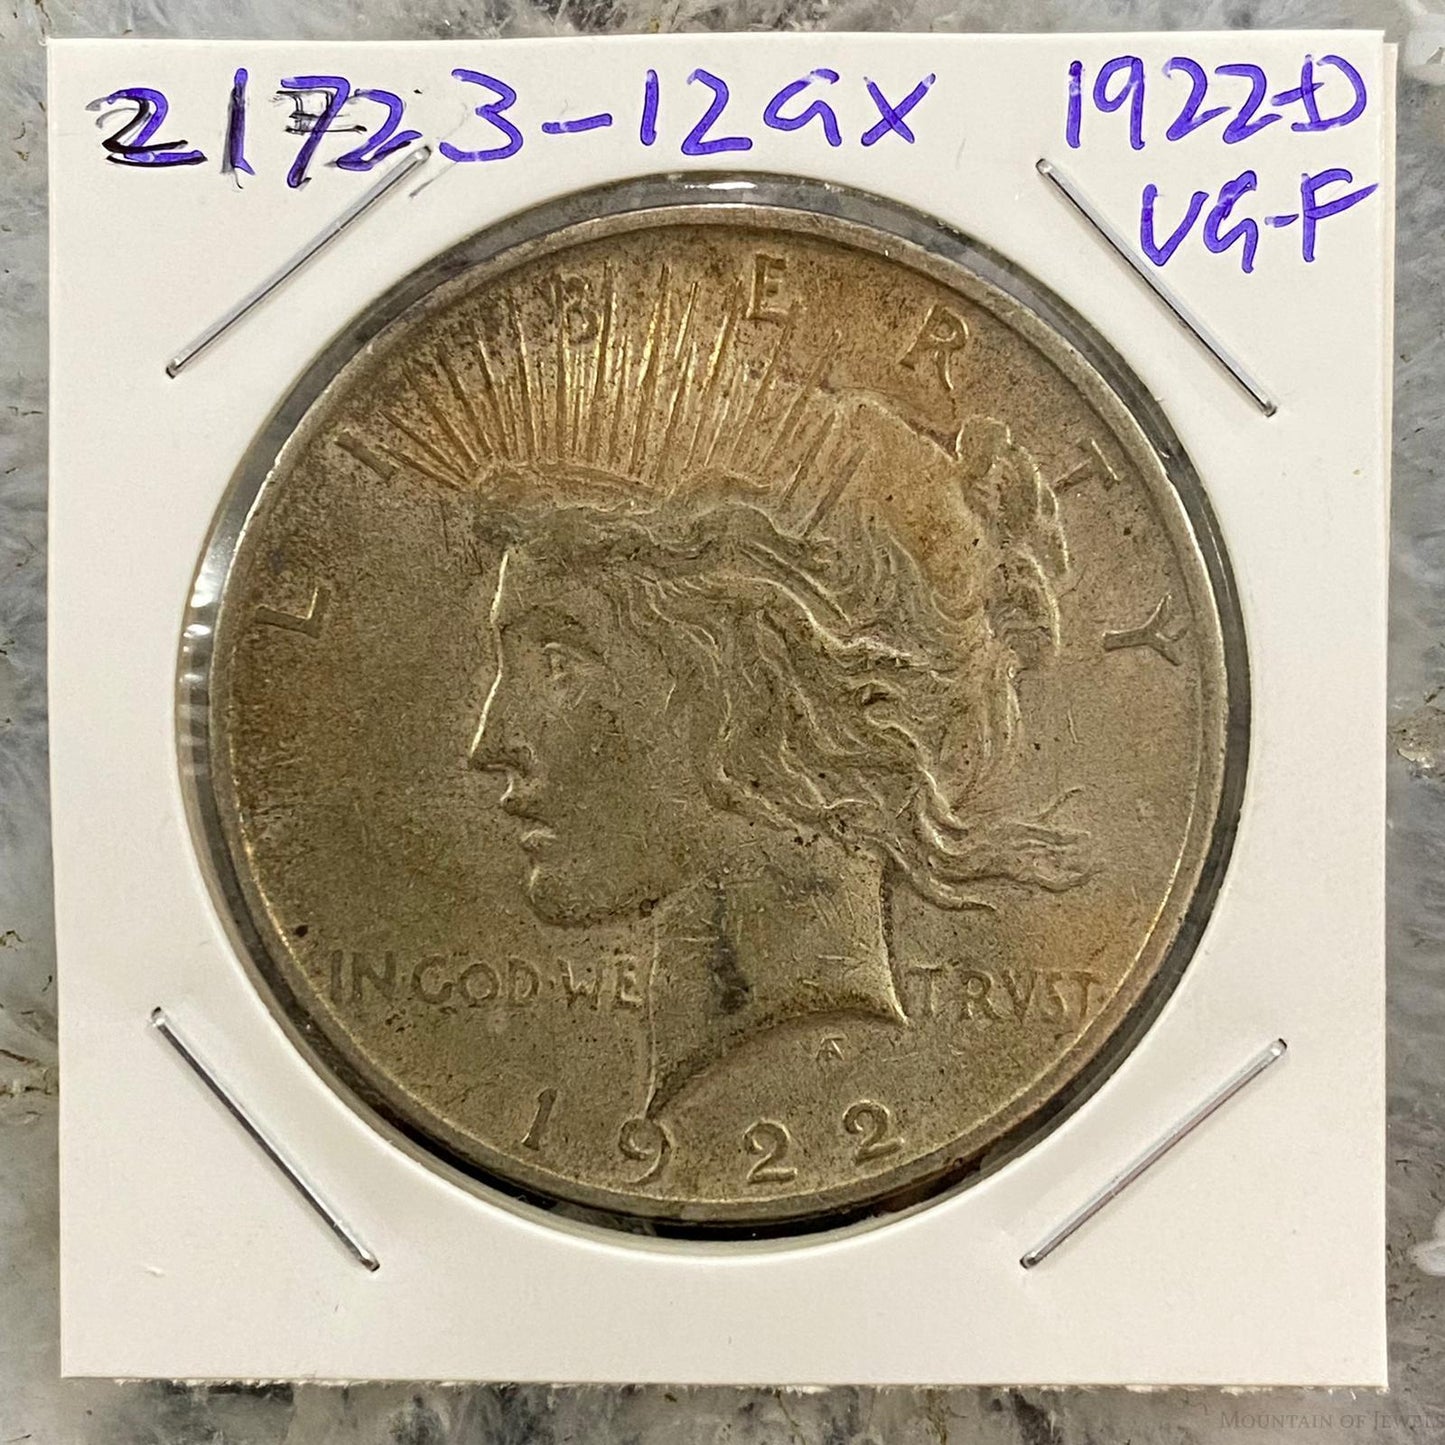 1922-D $1 US Peace Silver Dollar VG-F Collectible Coin #21723-12GX - Mountain of Jewels